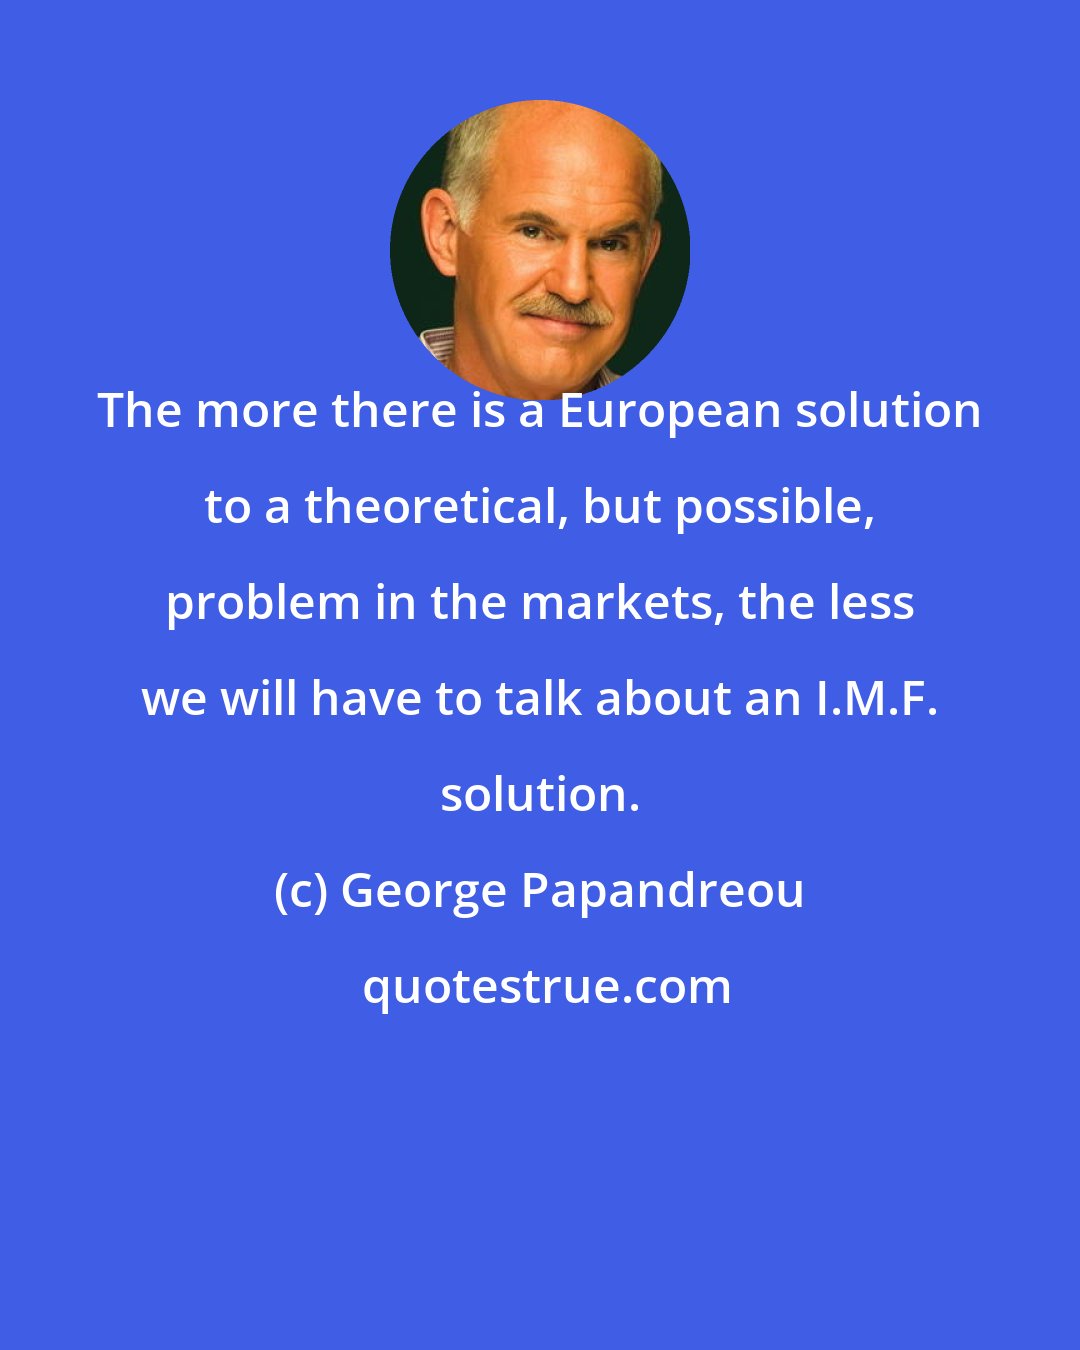 George Papandreou: The more there is a European solution to a theoretical, but possible, problem in the markets, the less we will have to talk about an I.M.F. solution.